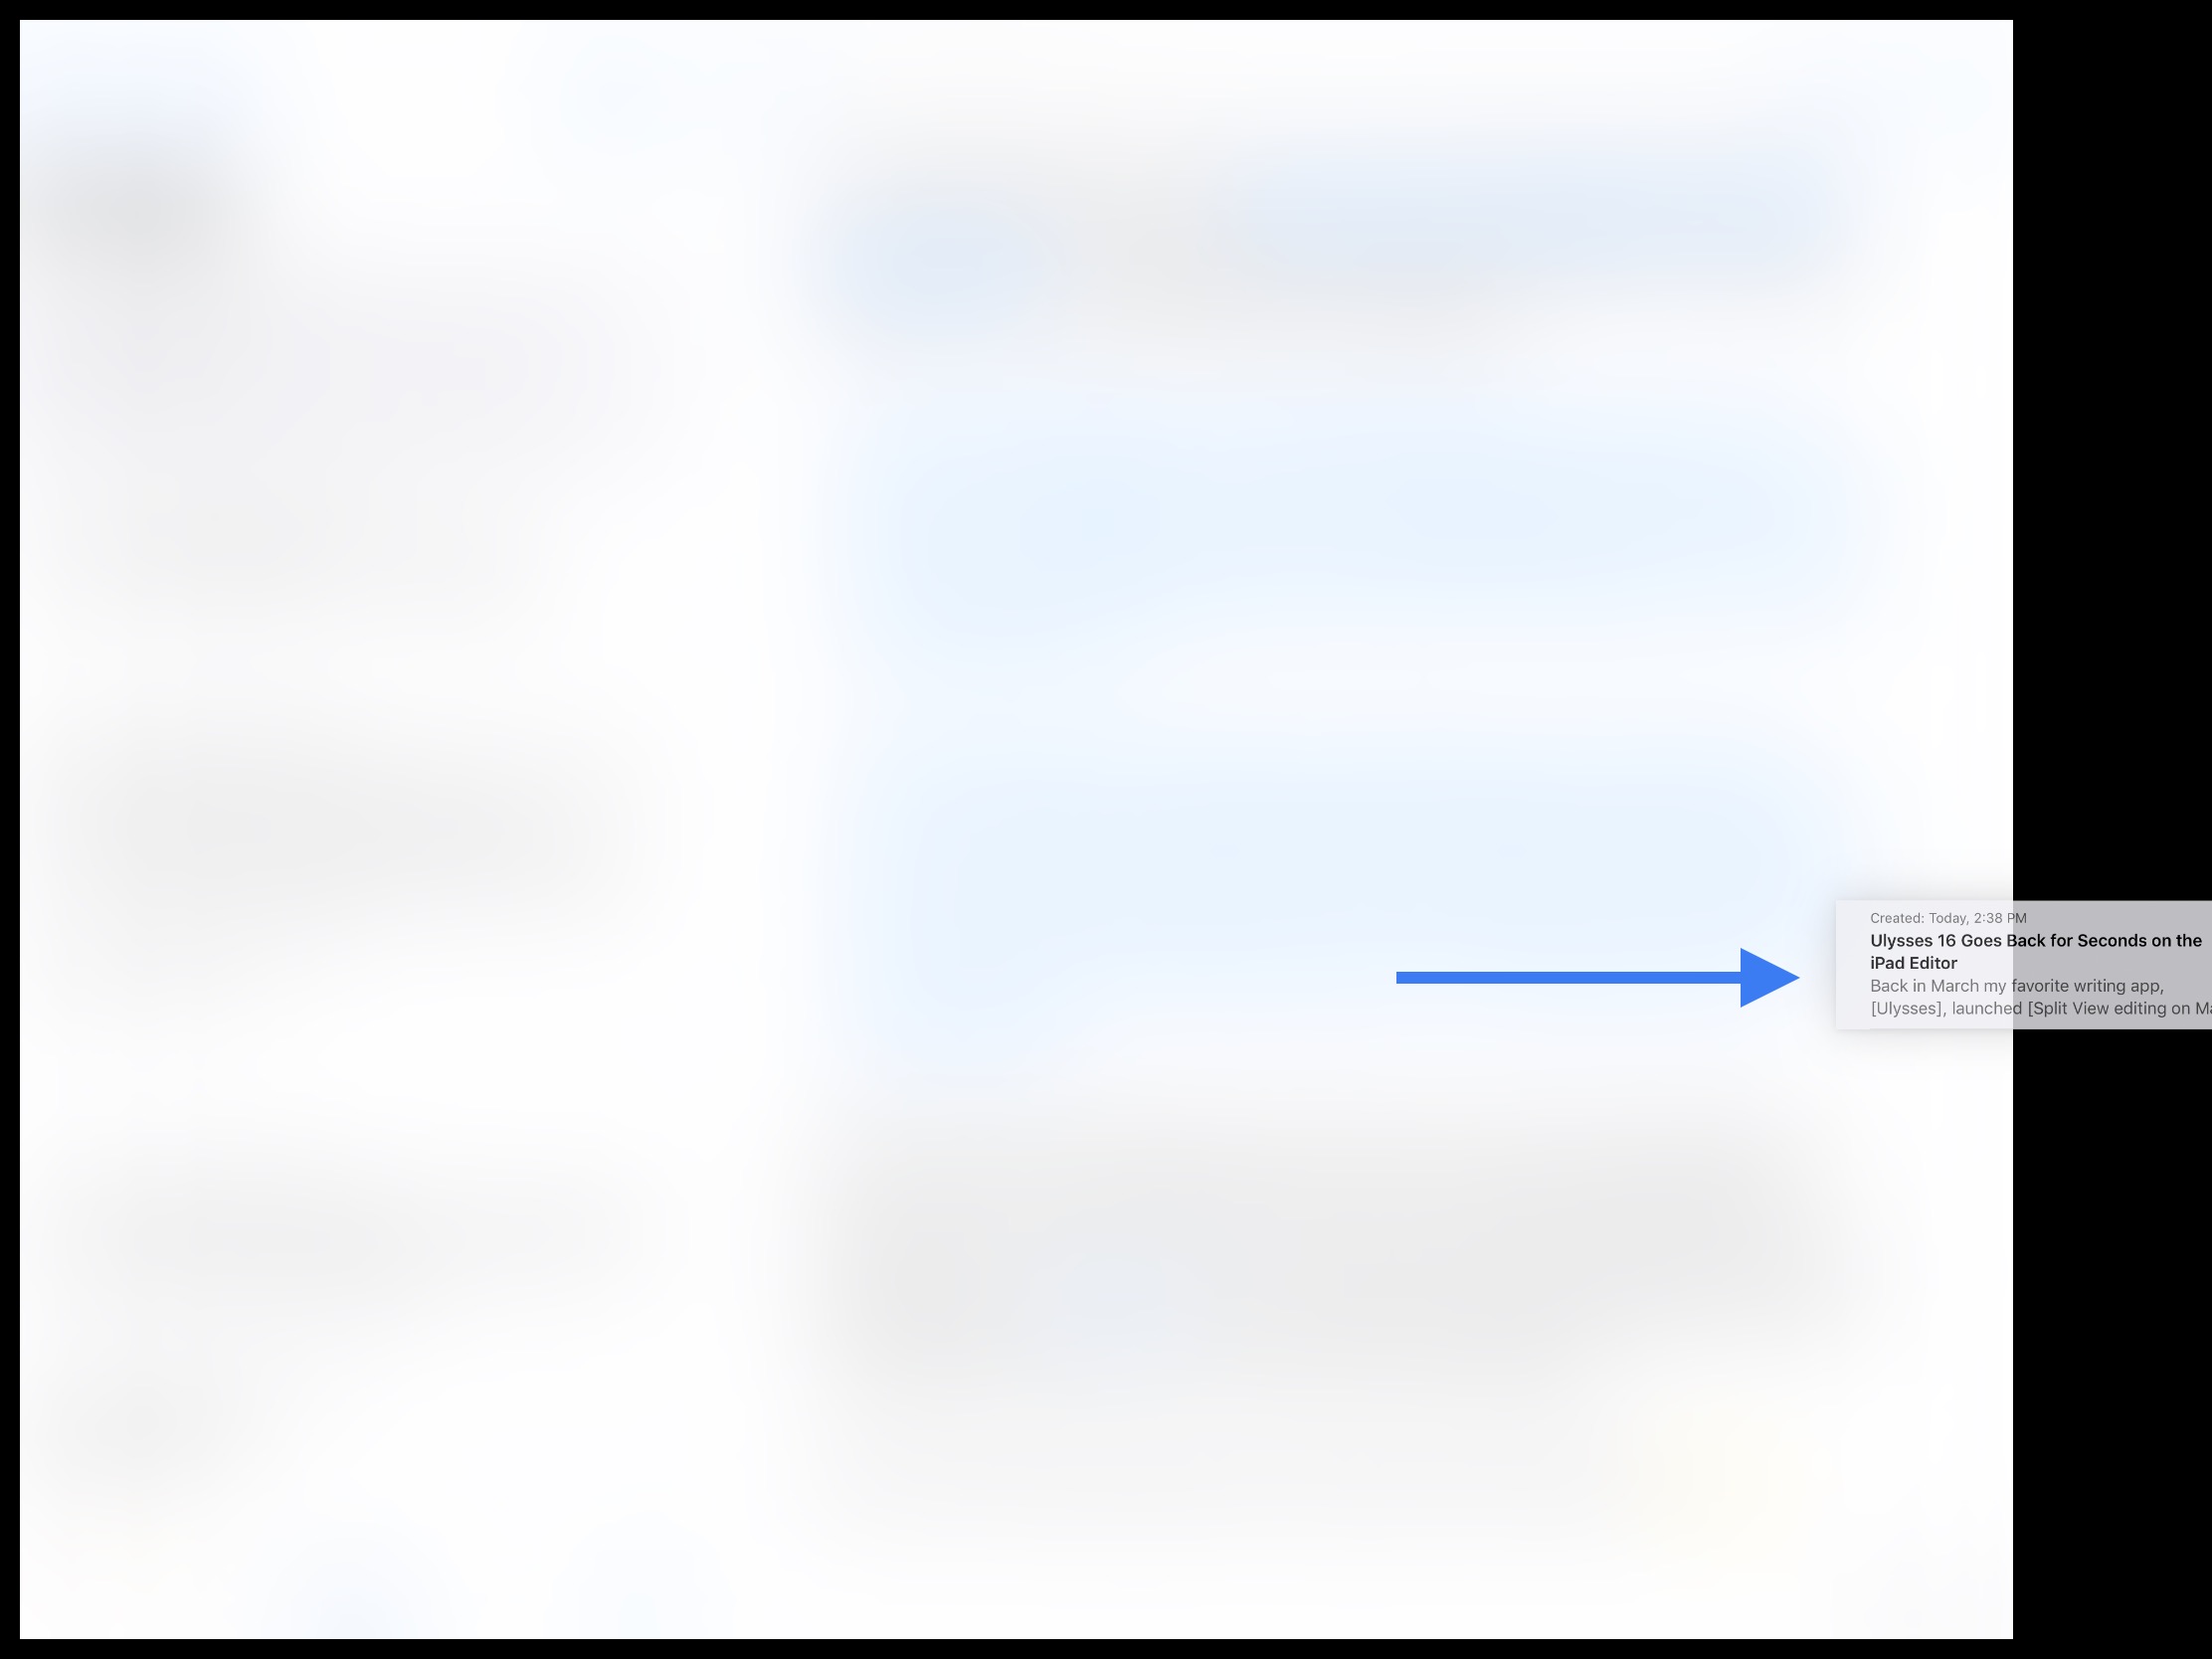  Drag a sheet from the sheet list to either edge of the screen — this will trigger a nice animation and then open the dragged sheet next to the current view. 